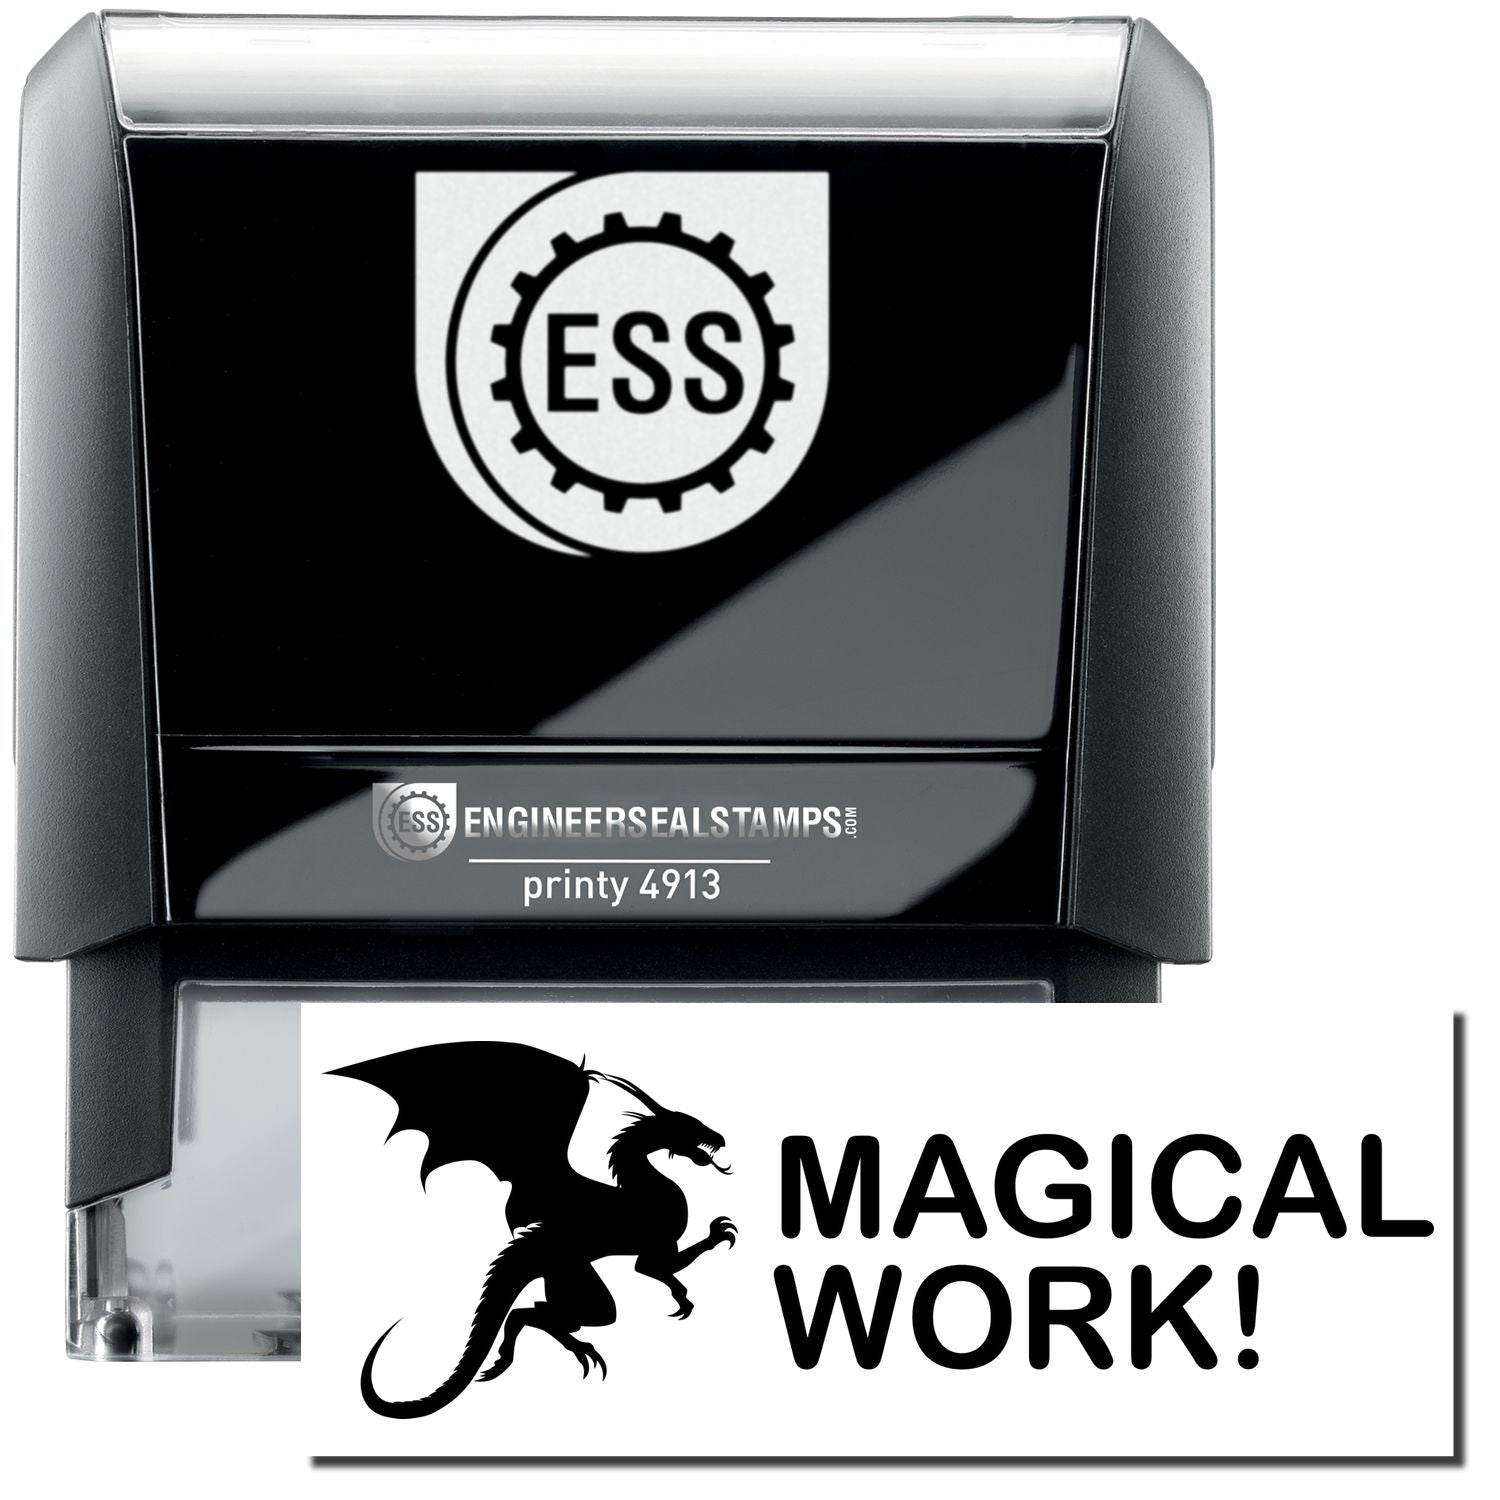 A self-inking stamp with a stamped image showing how the text "MAGICAL WORK!" in a large font with an icon of a dragon on the left side is displayed by it after stamping.